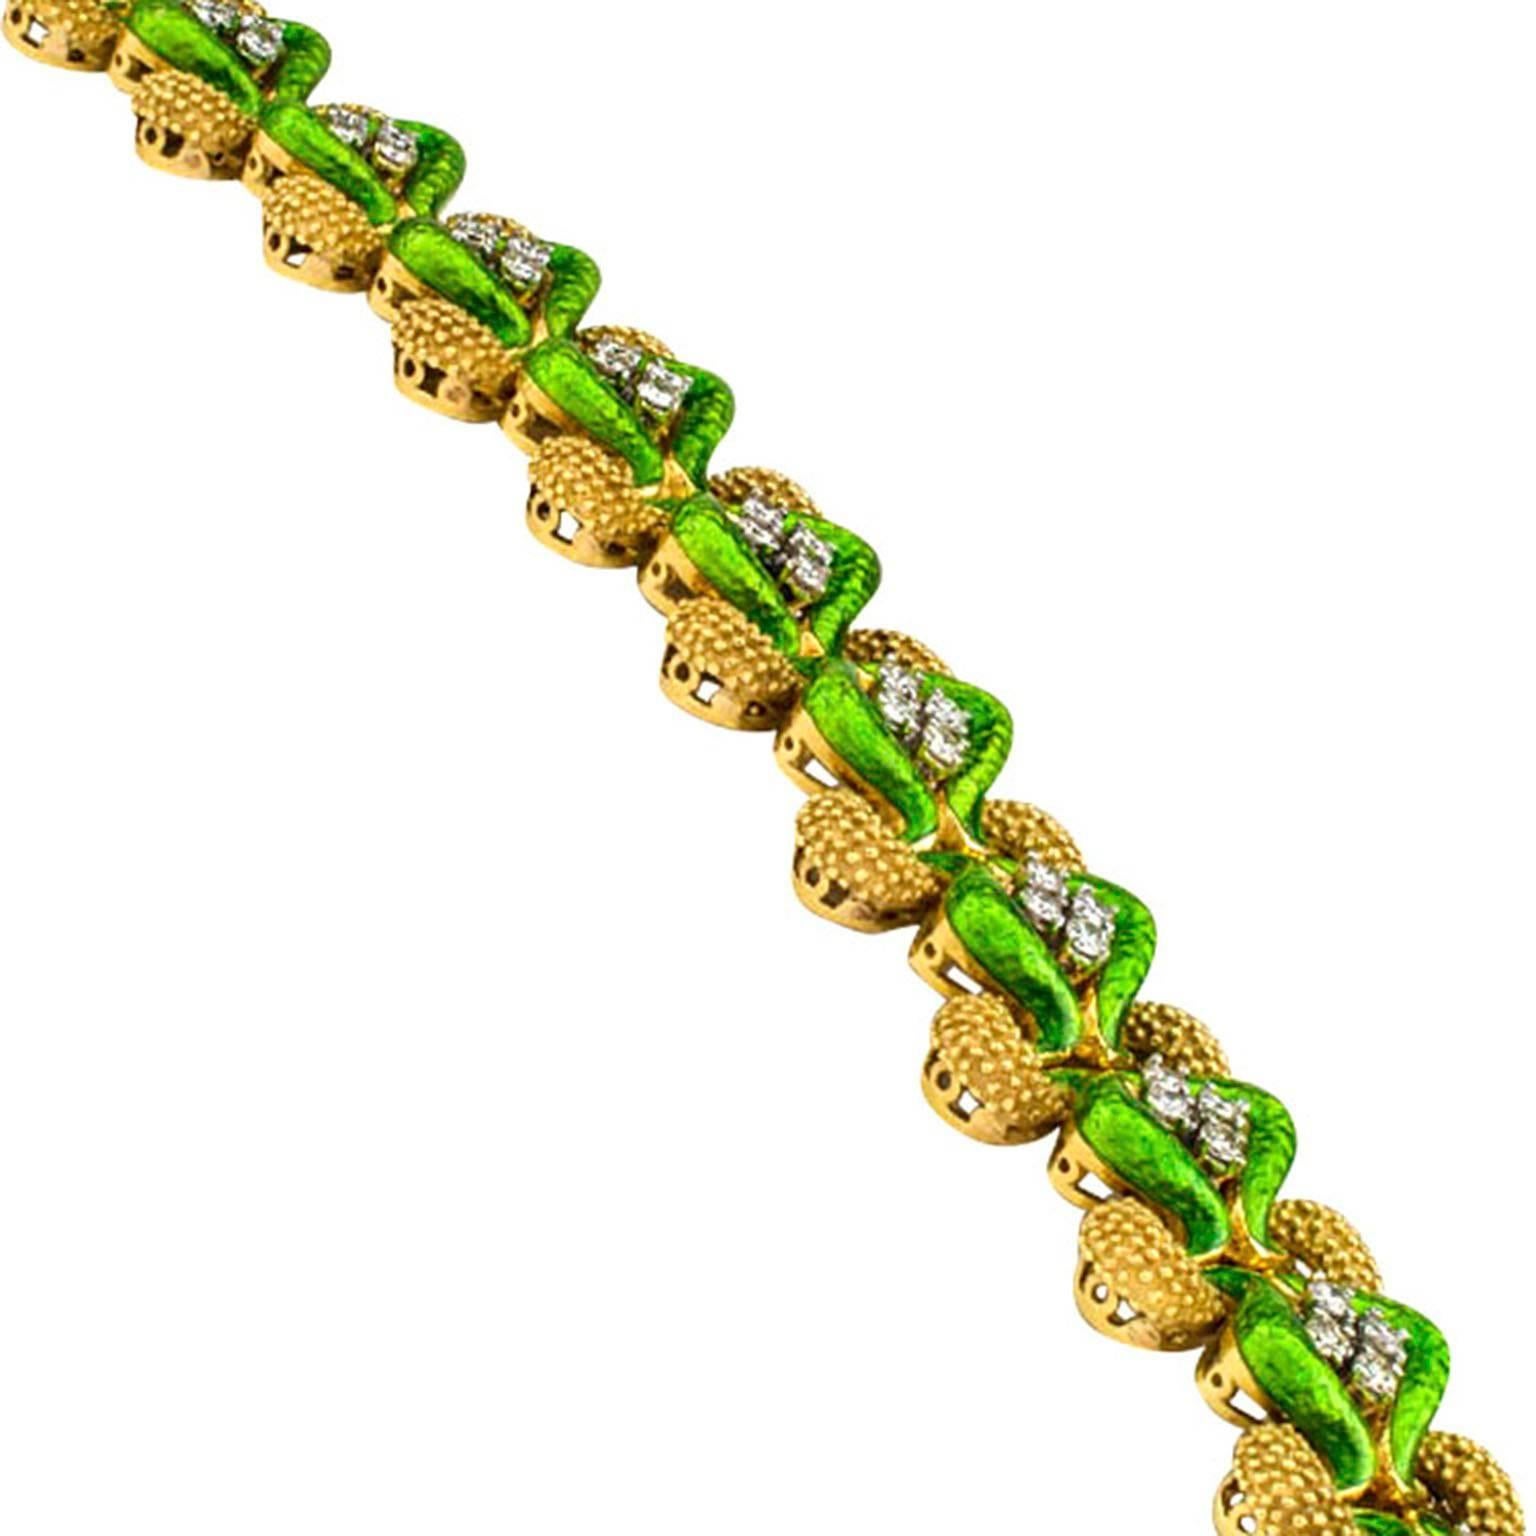 1970's La Triomphe Pistachio Green Enamel Gold and Diamond Link Bracelet.
Eye candy straight out of the last quarter of the twentieth century.  Links composed from carefully arranged organic shapes decorated with applied granulation and pistachio